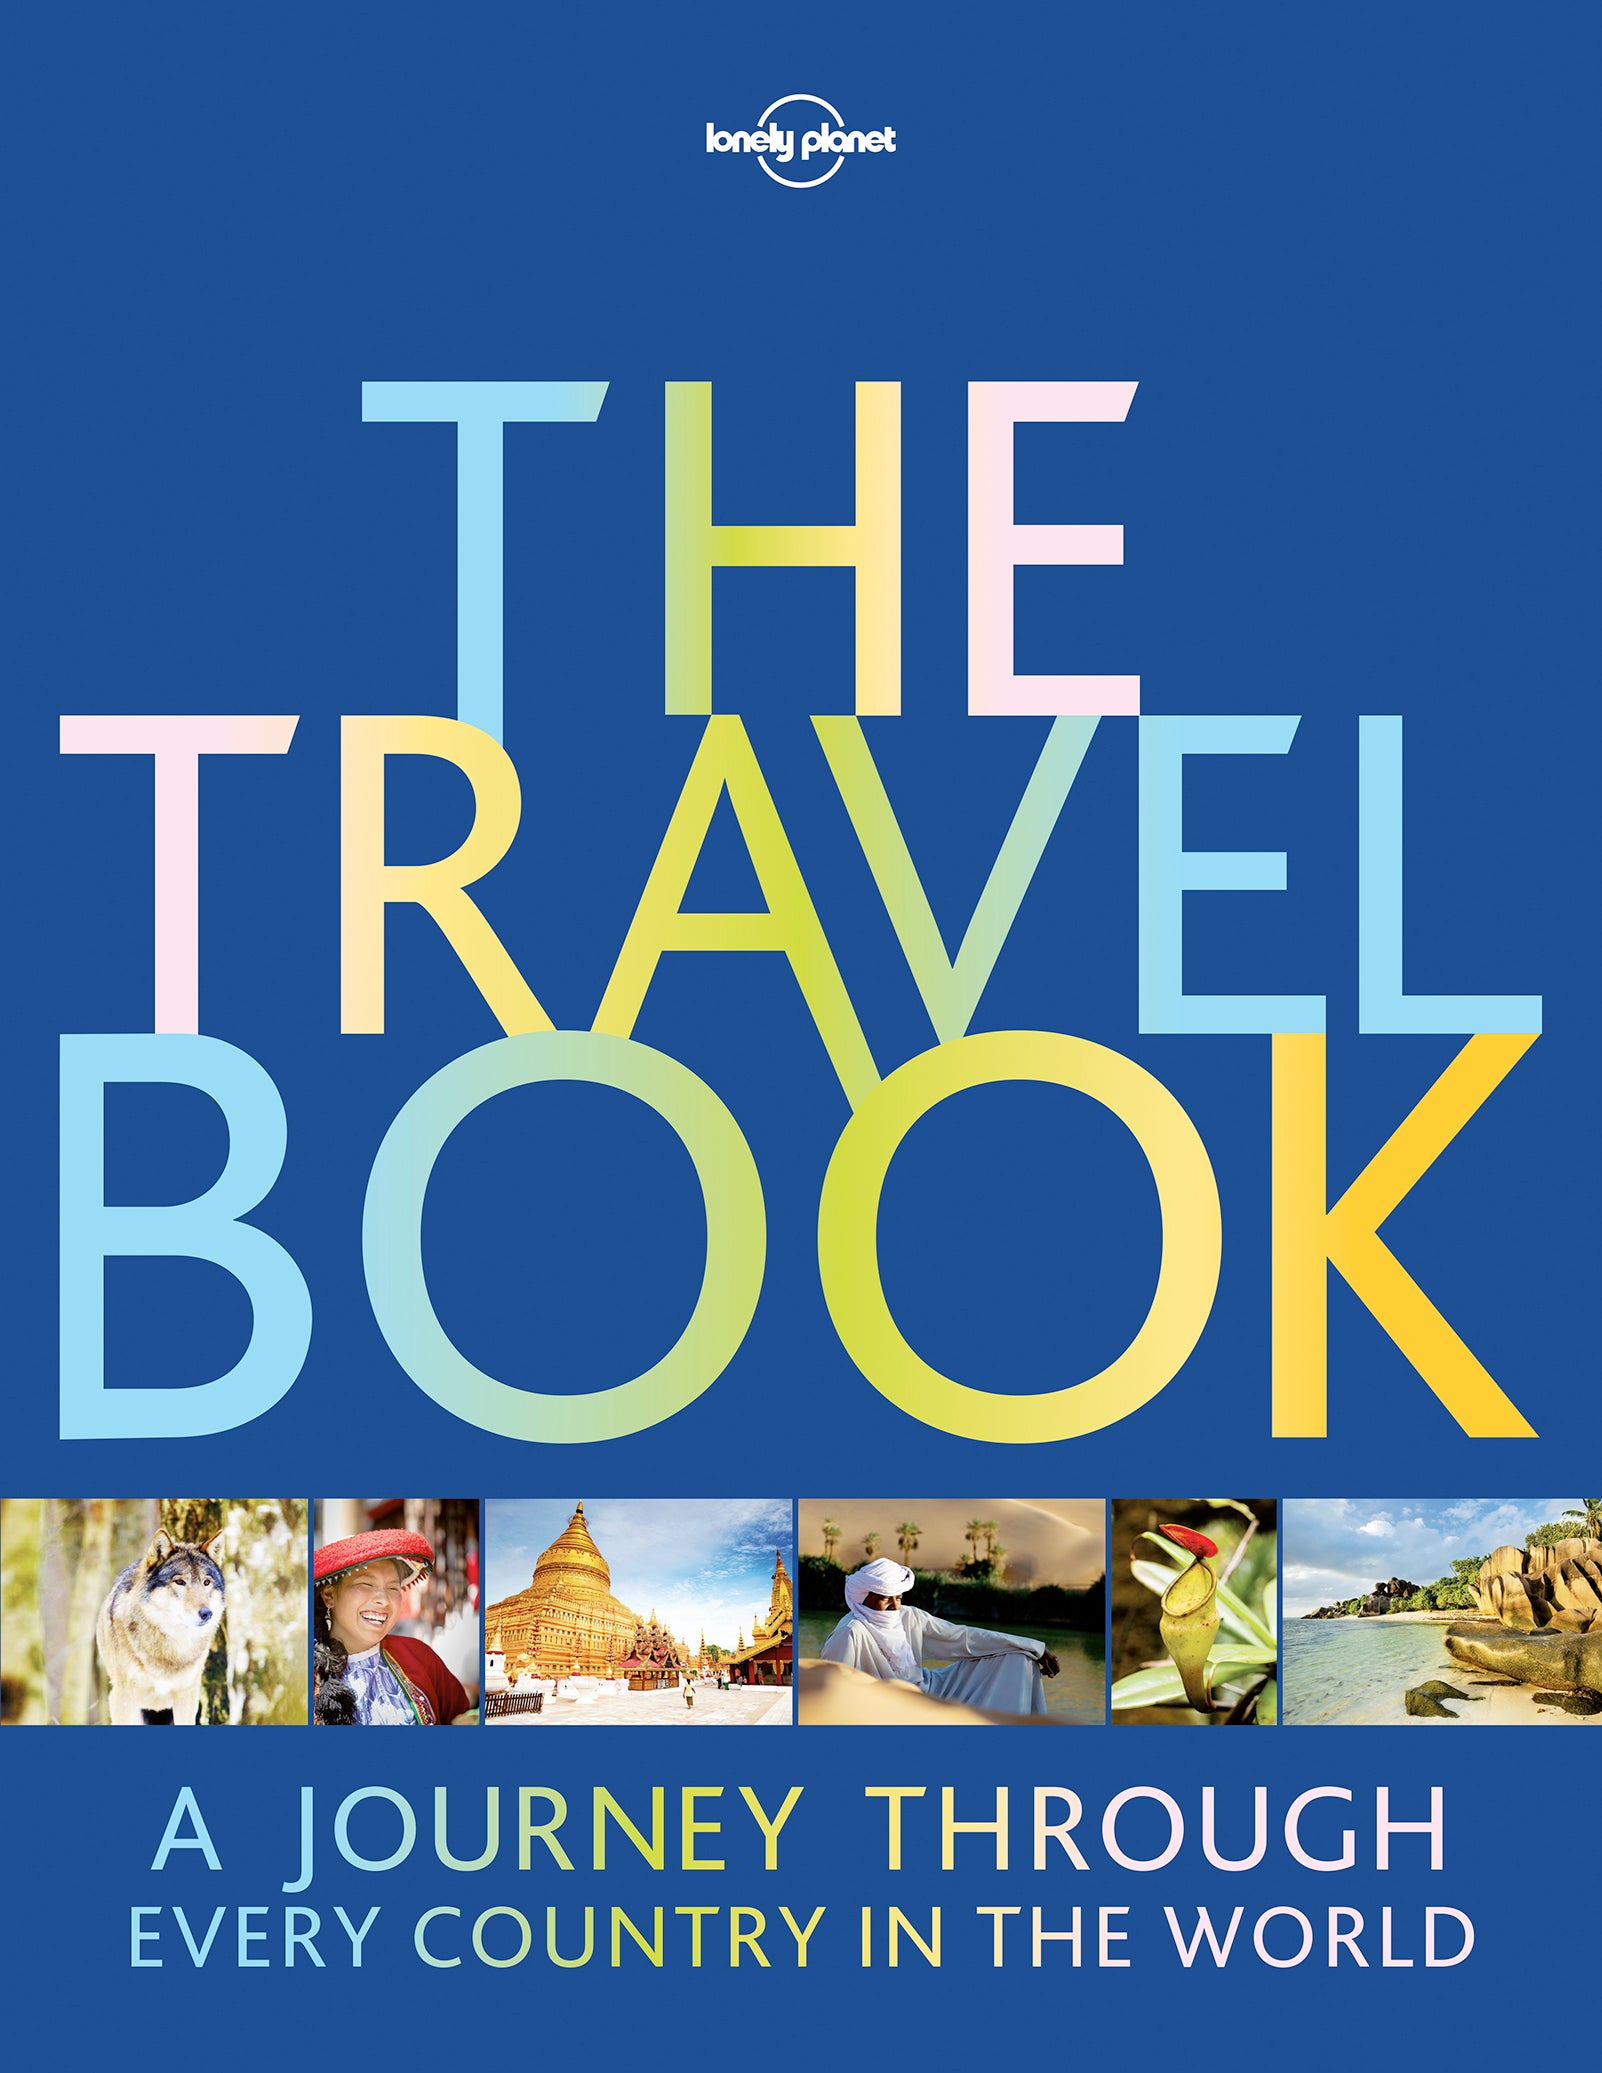 Online　The　(Paperback)　Travel　Planet　Shop　Book　Lonely